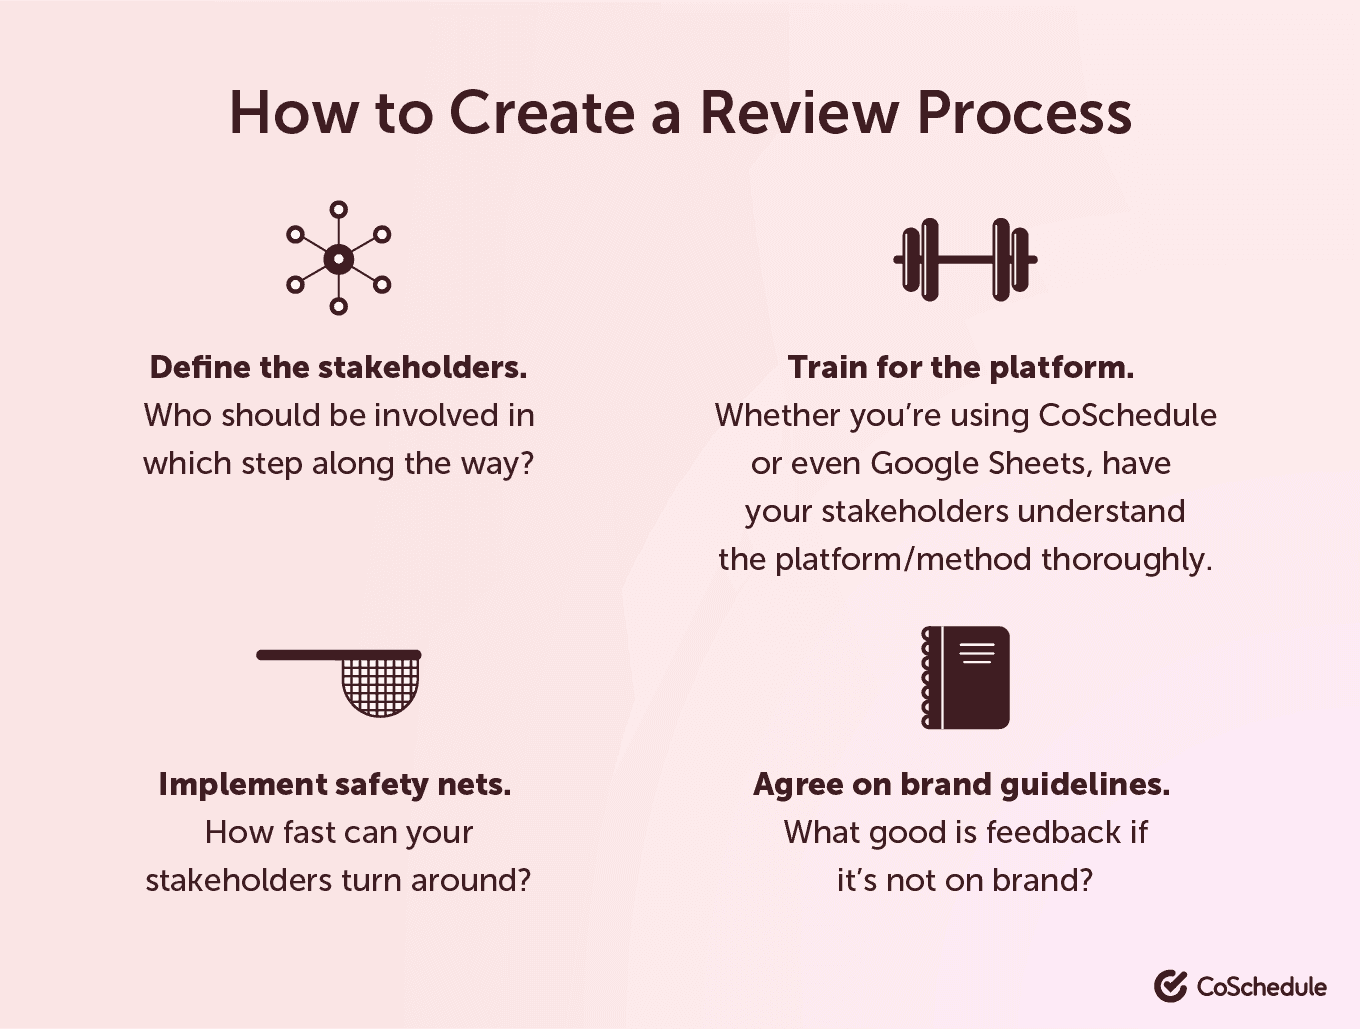 How to create a review process